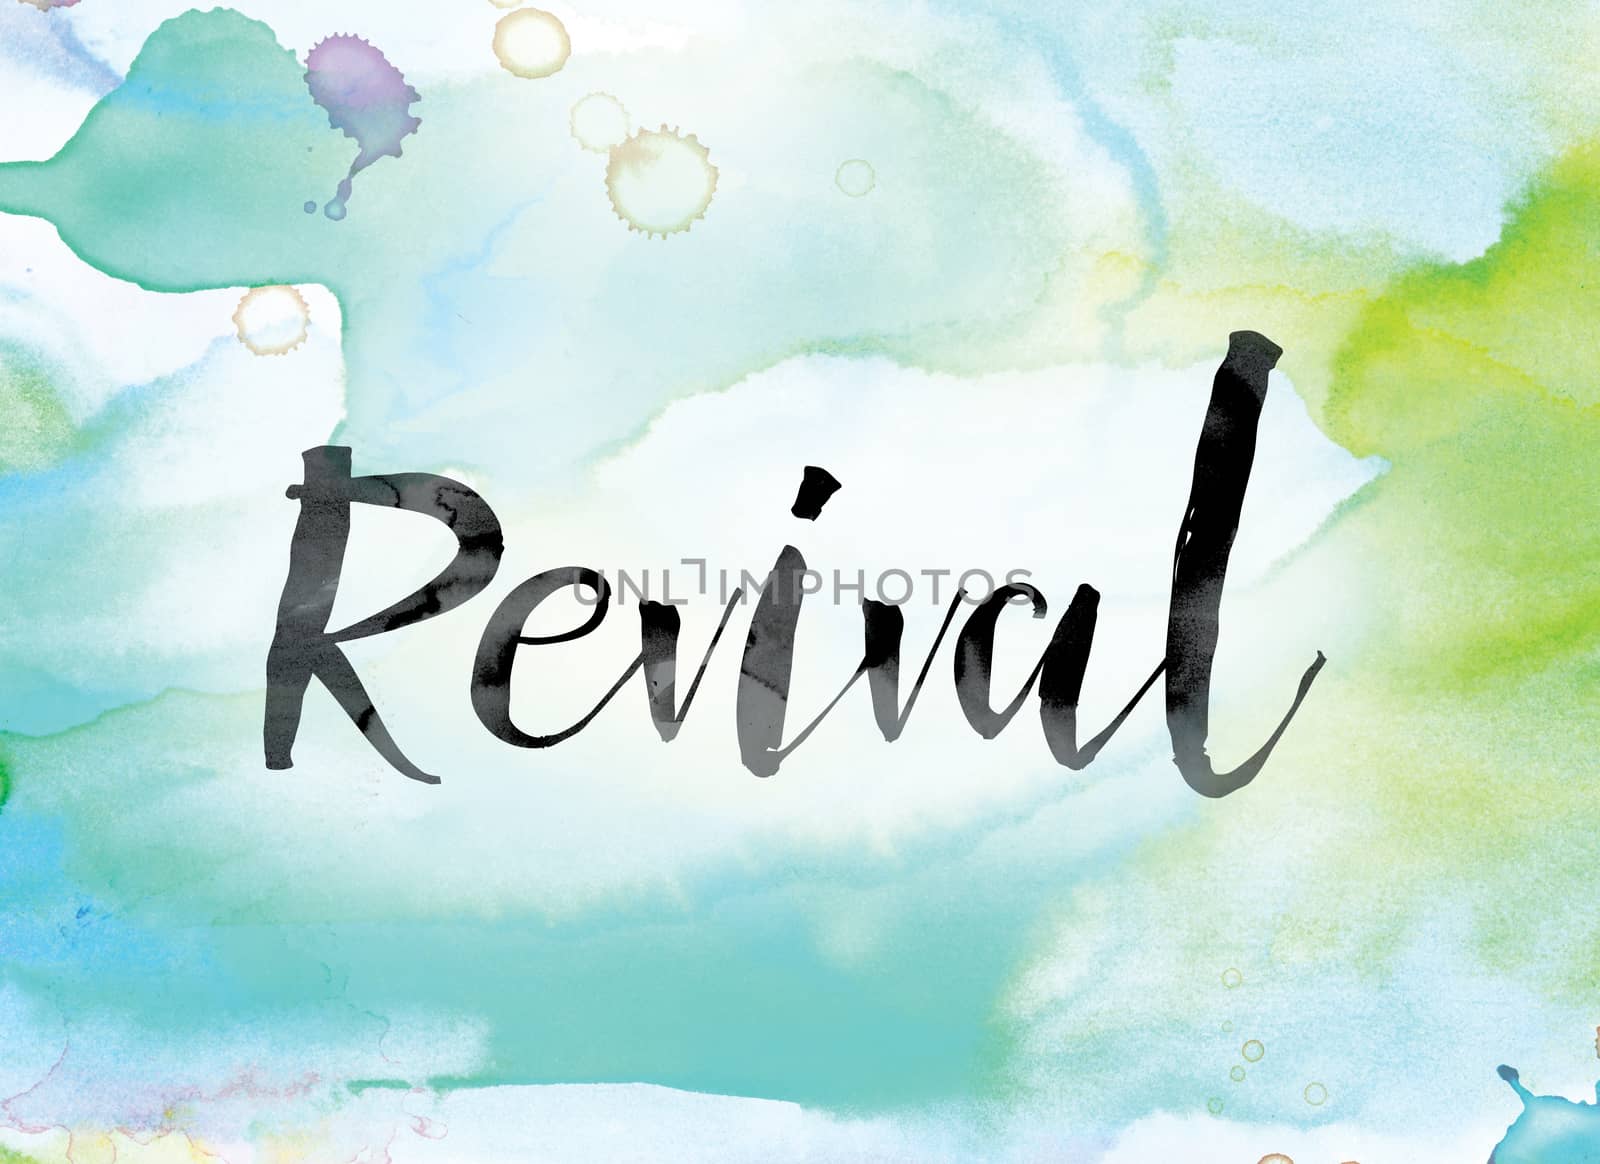 The word "Revival" painted in black ink over a colorful watercolor washed background concept and theme.